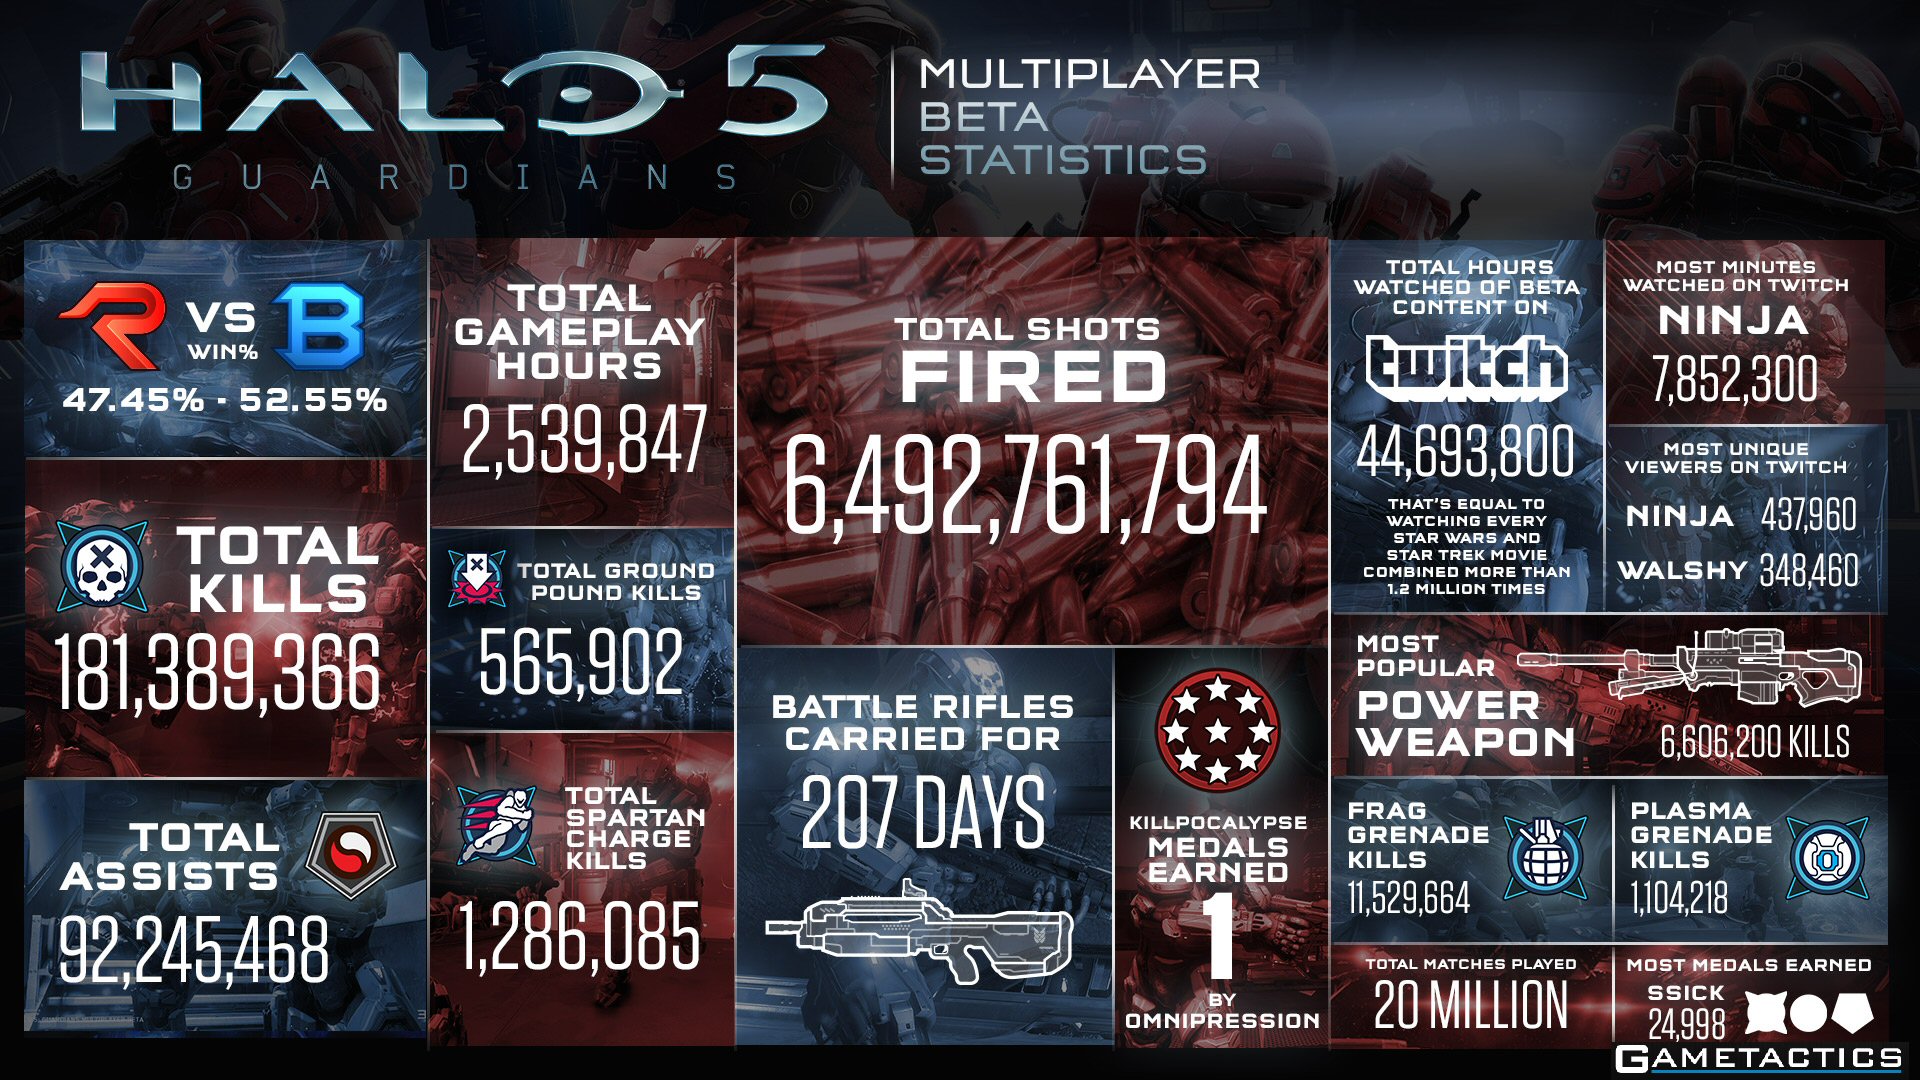 Halo 5: Guardians Multiplayer Beta Records 2.5 Million Hours and 20 Million Matches Played